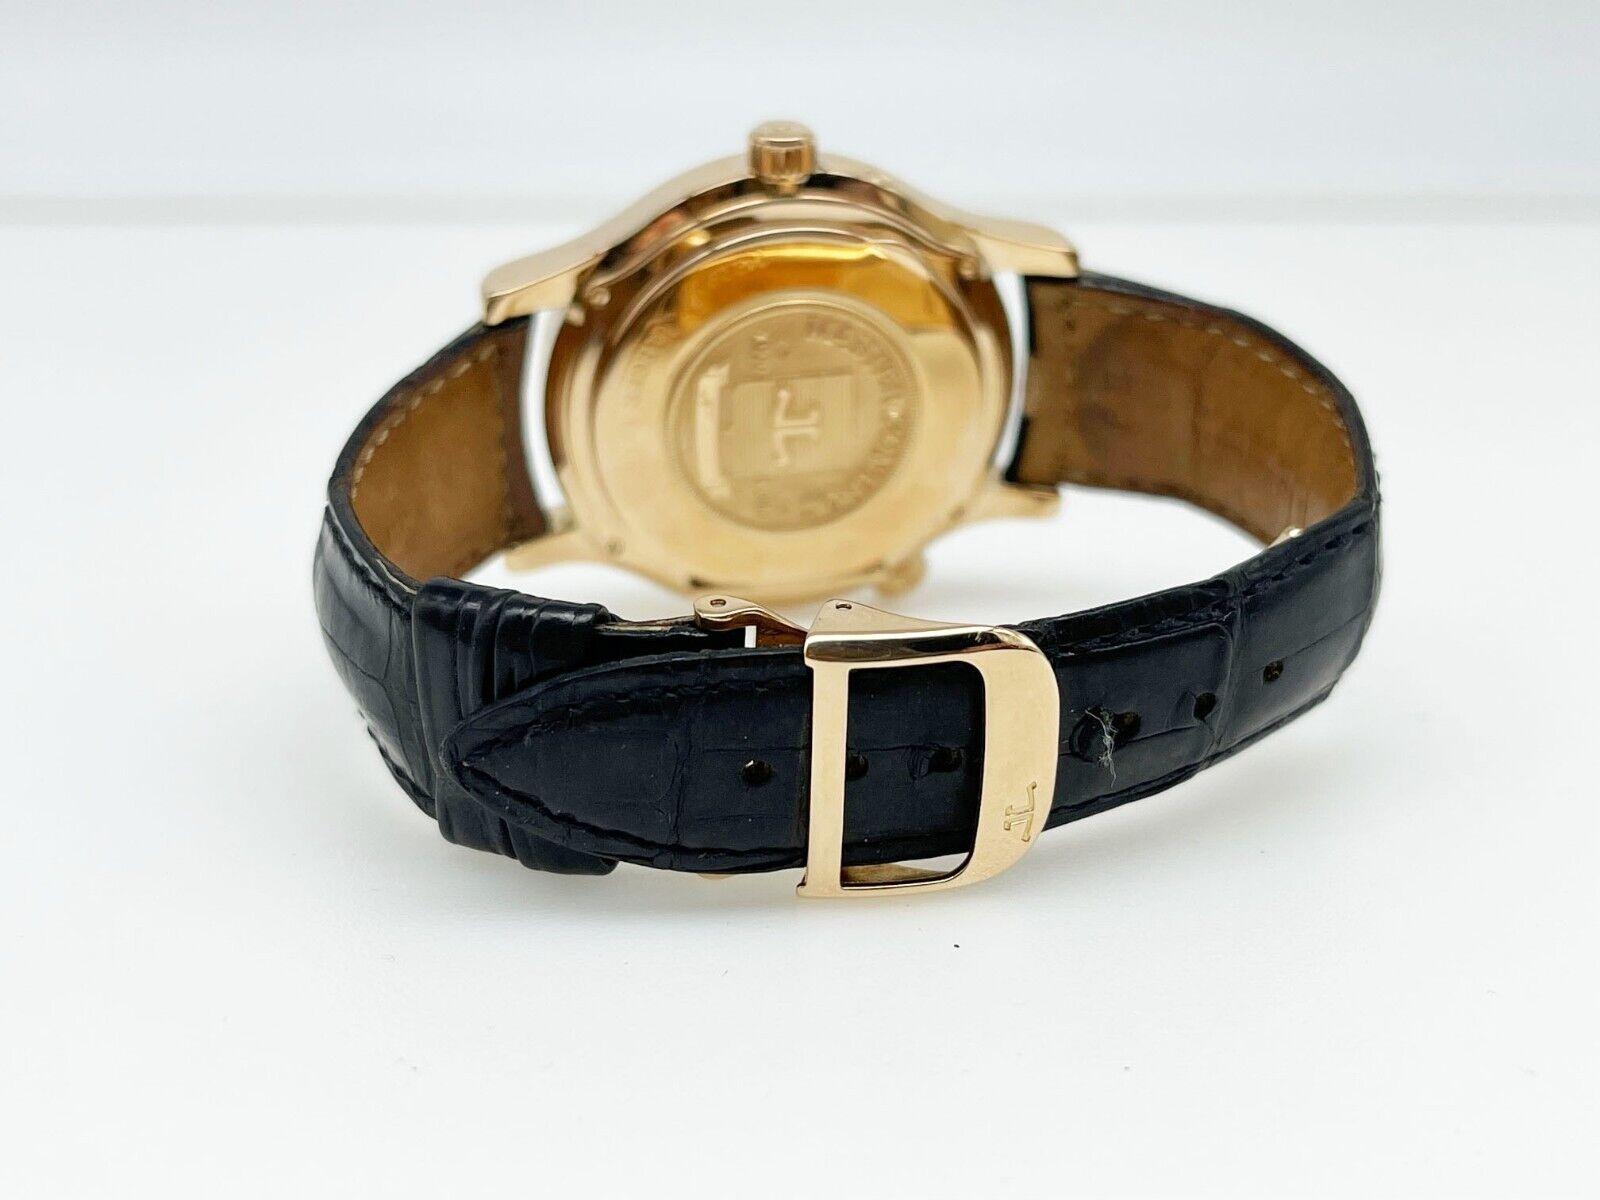 Jaeger-LeCoultre 142.2.92 Master Geographic 18K Rose Gold In Excellent Condition For Sale In San Diego, CA